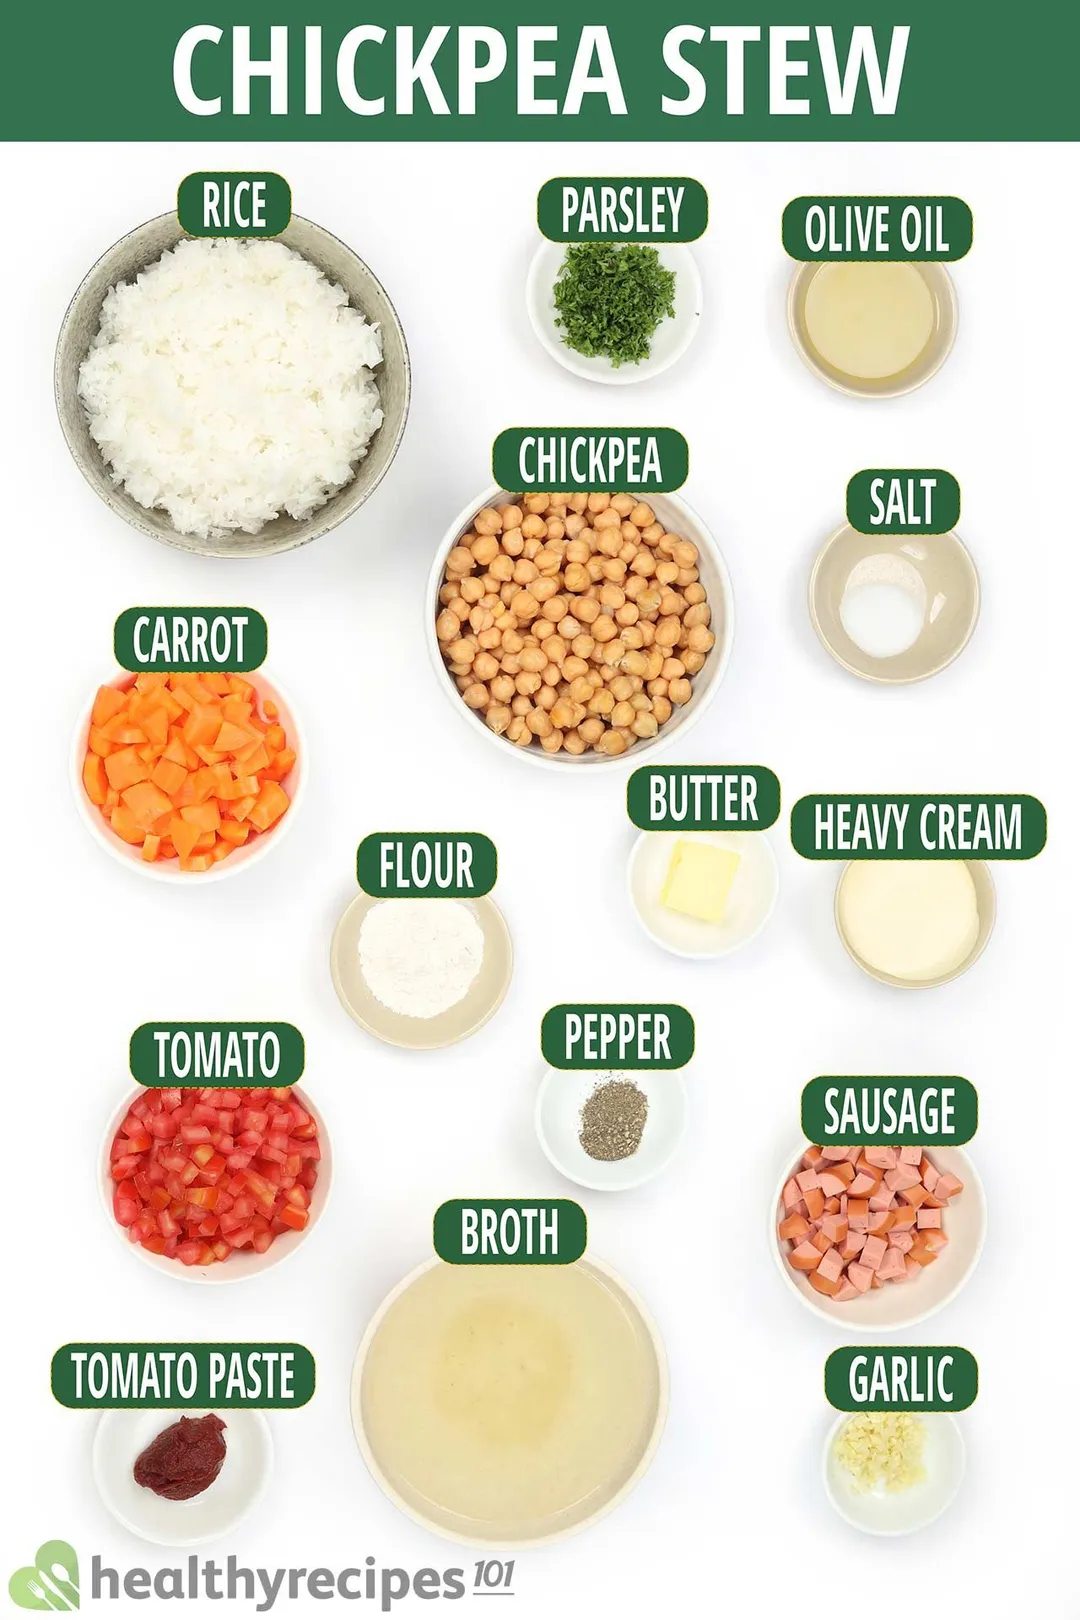 Ingredients for chickpea stew, including a bowl of chickpeas, carrot cubes, cooked white rice, diced tomatoes, and other ingredients.